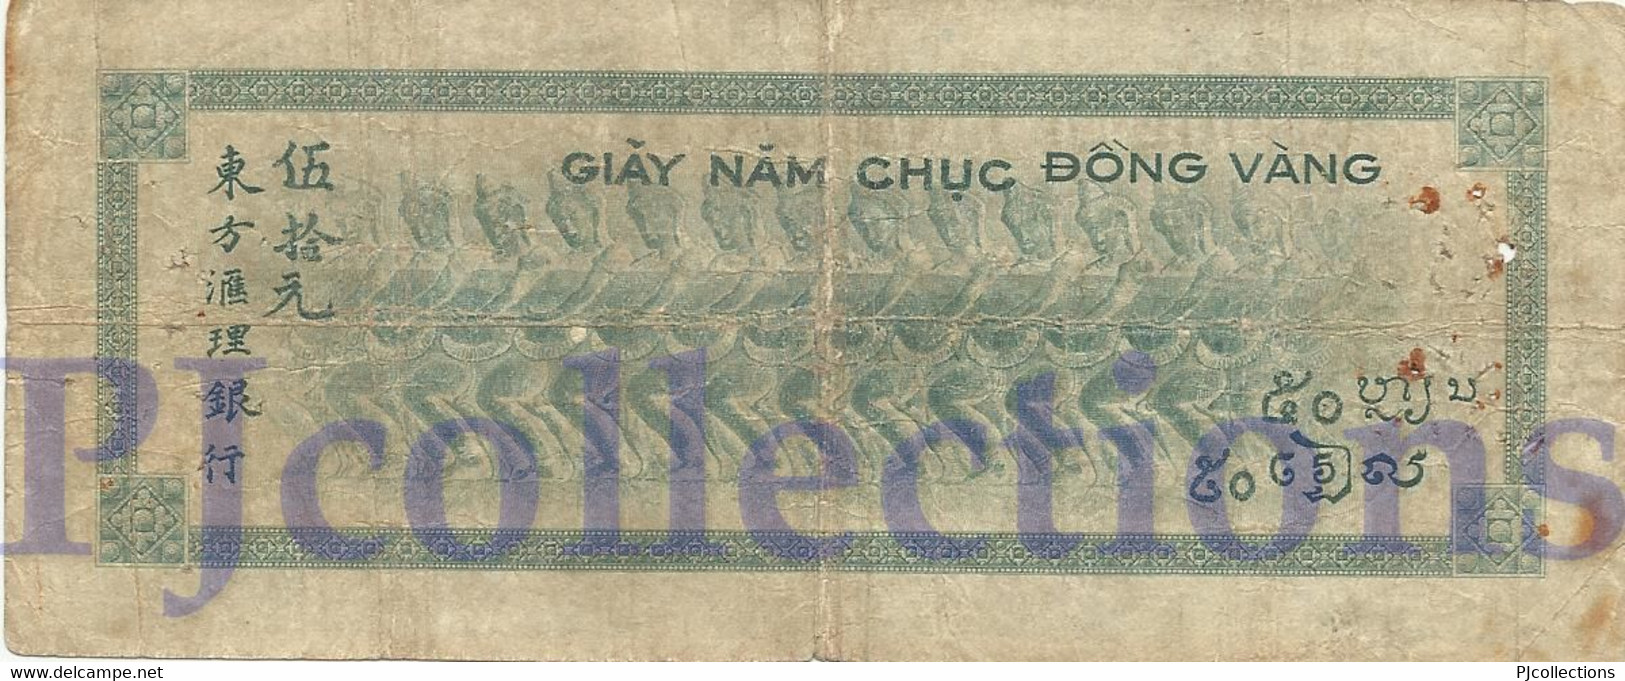 FRENCH INDOCHINA 50 PIASTRES 1945 PICK 77a VG/F - Indochine